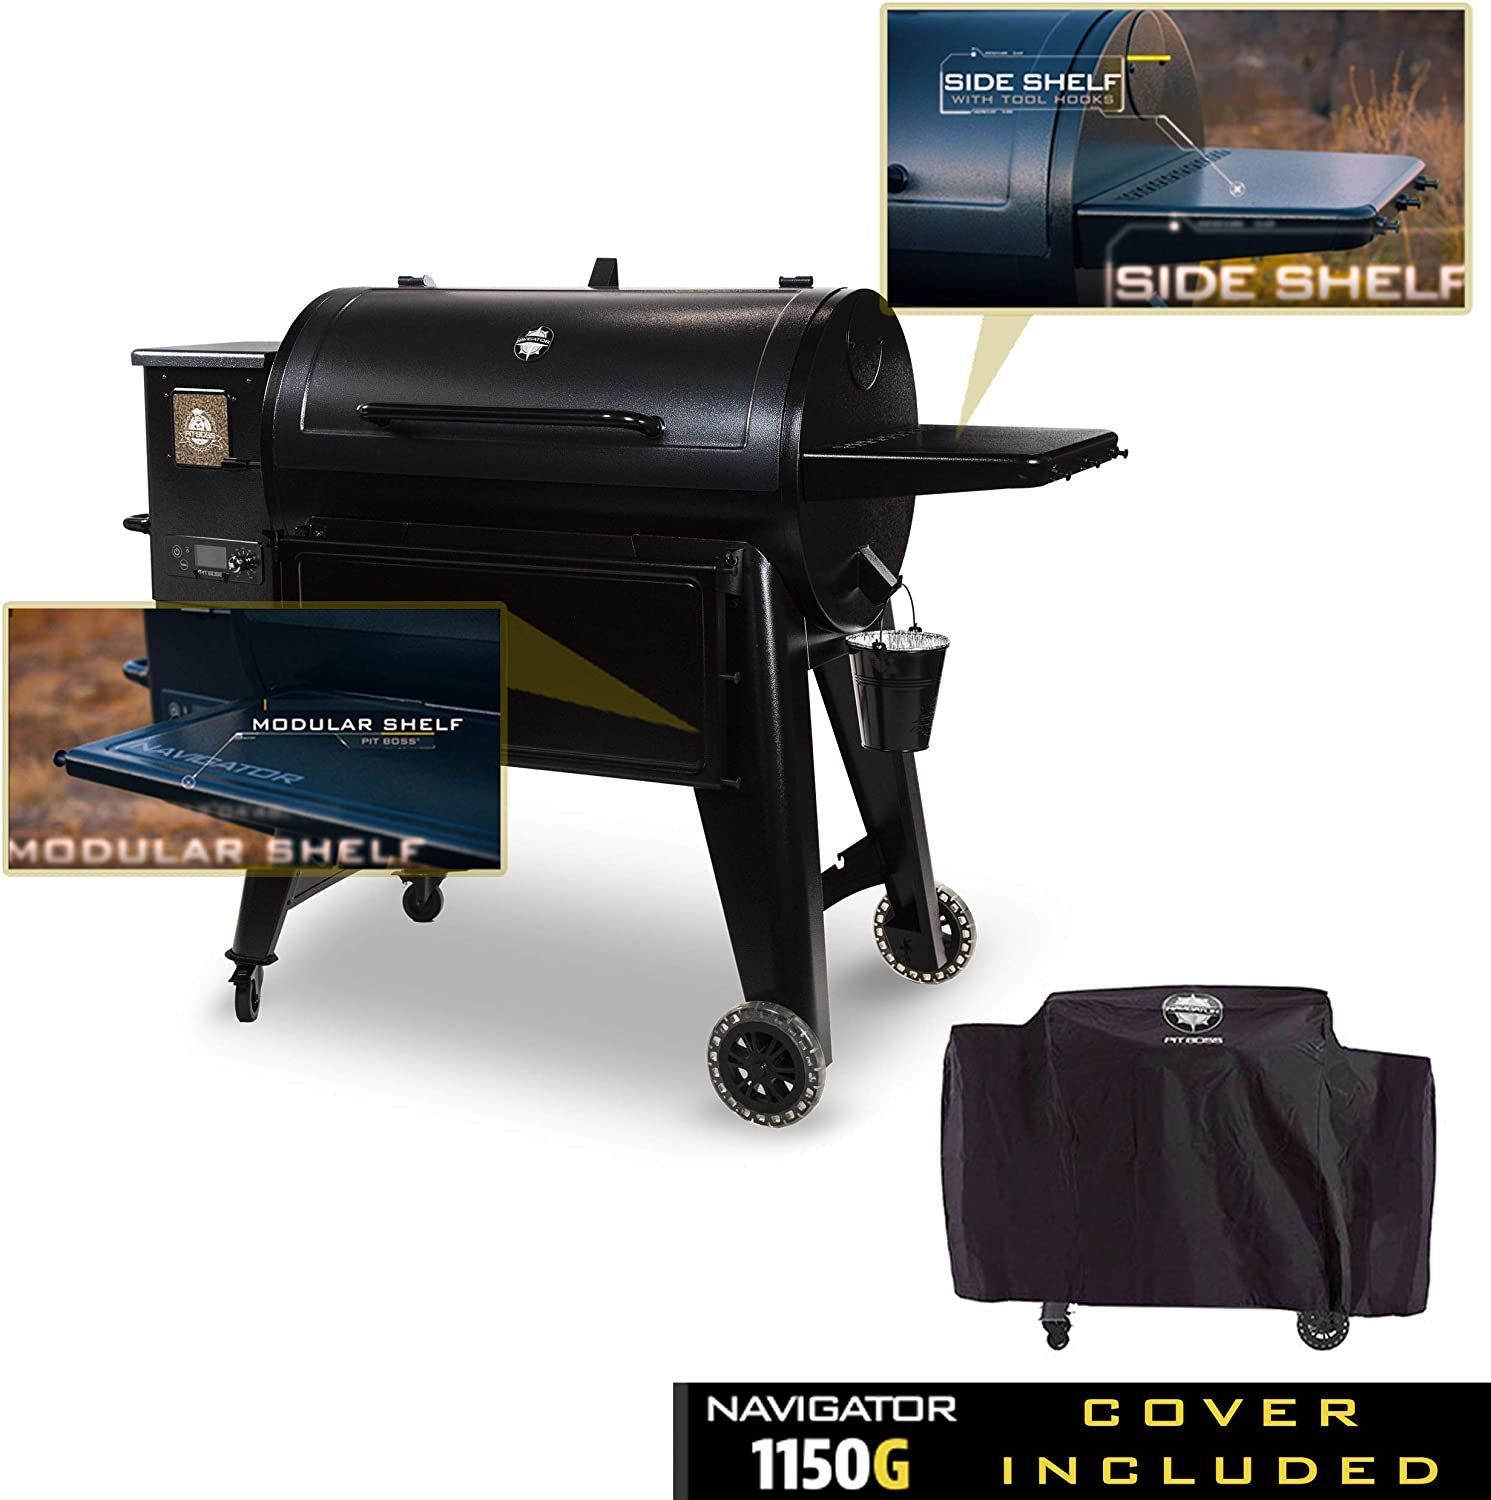 Pit Boss 1150 Wood Pellet Grill with Cover - image 5 of 8